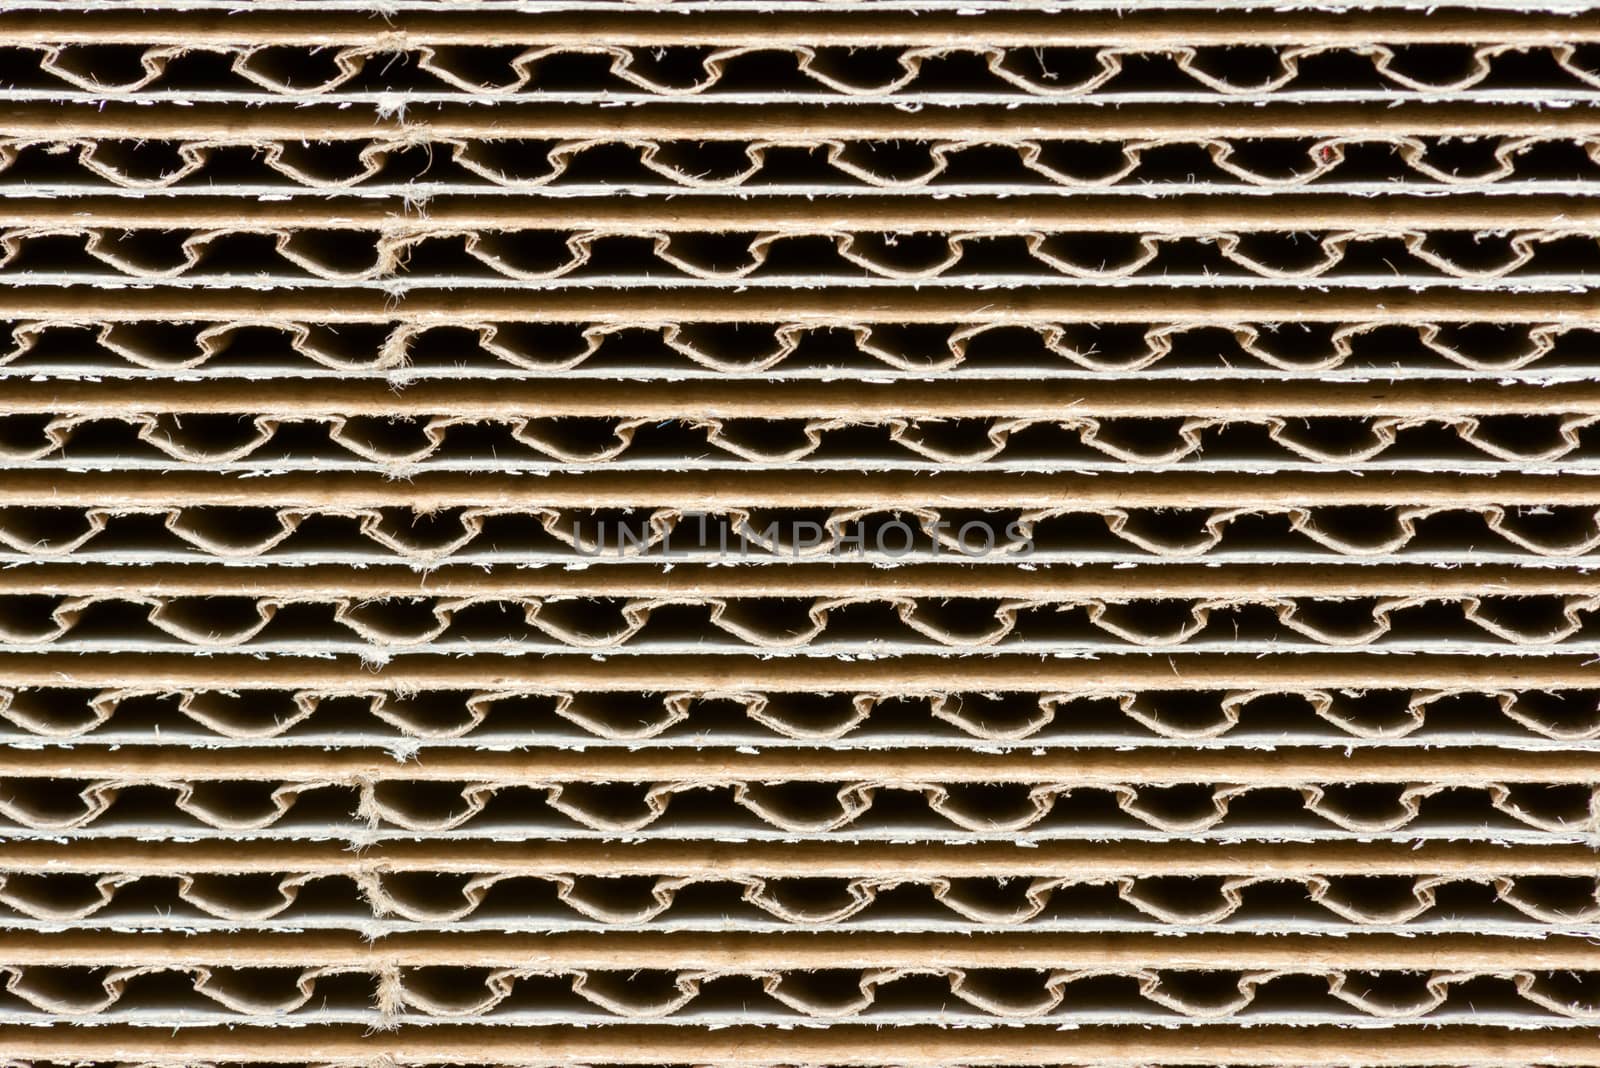 Stack of corrugated cardboard in a large pile by DNKSTUDIO